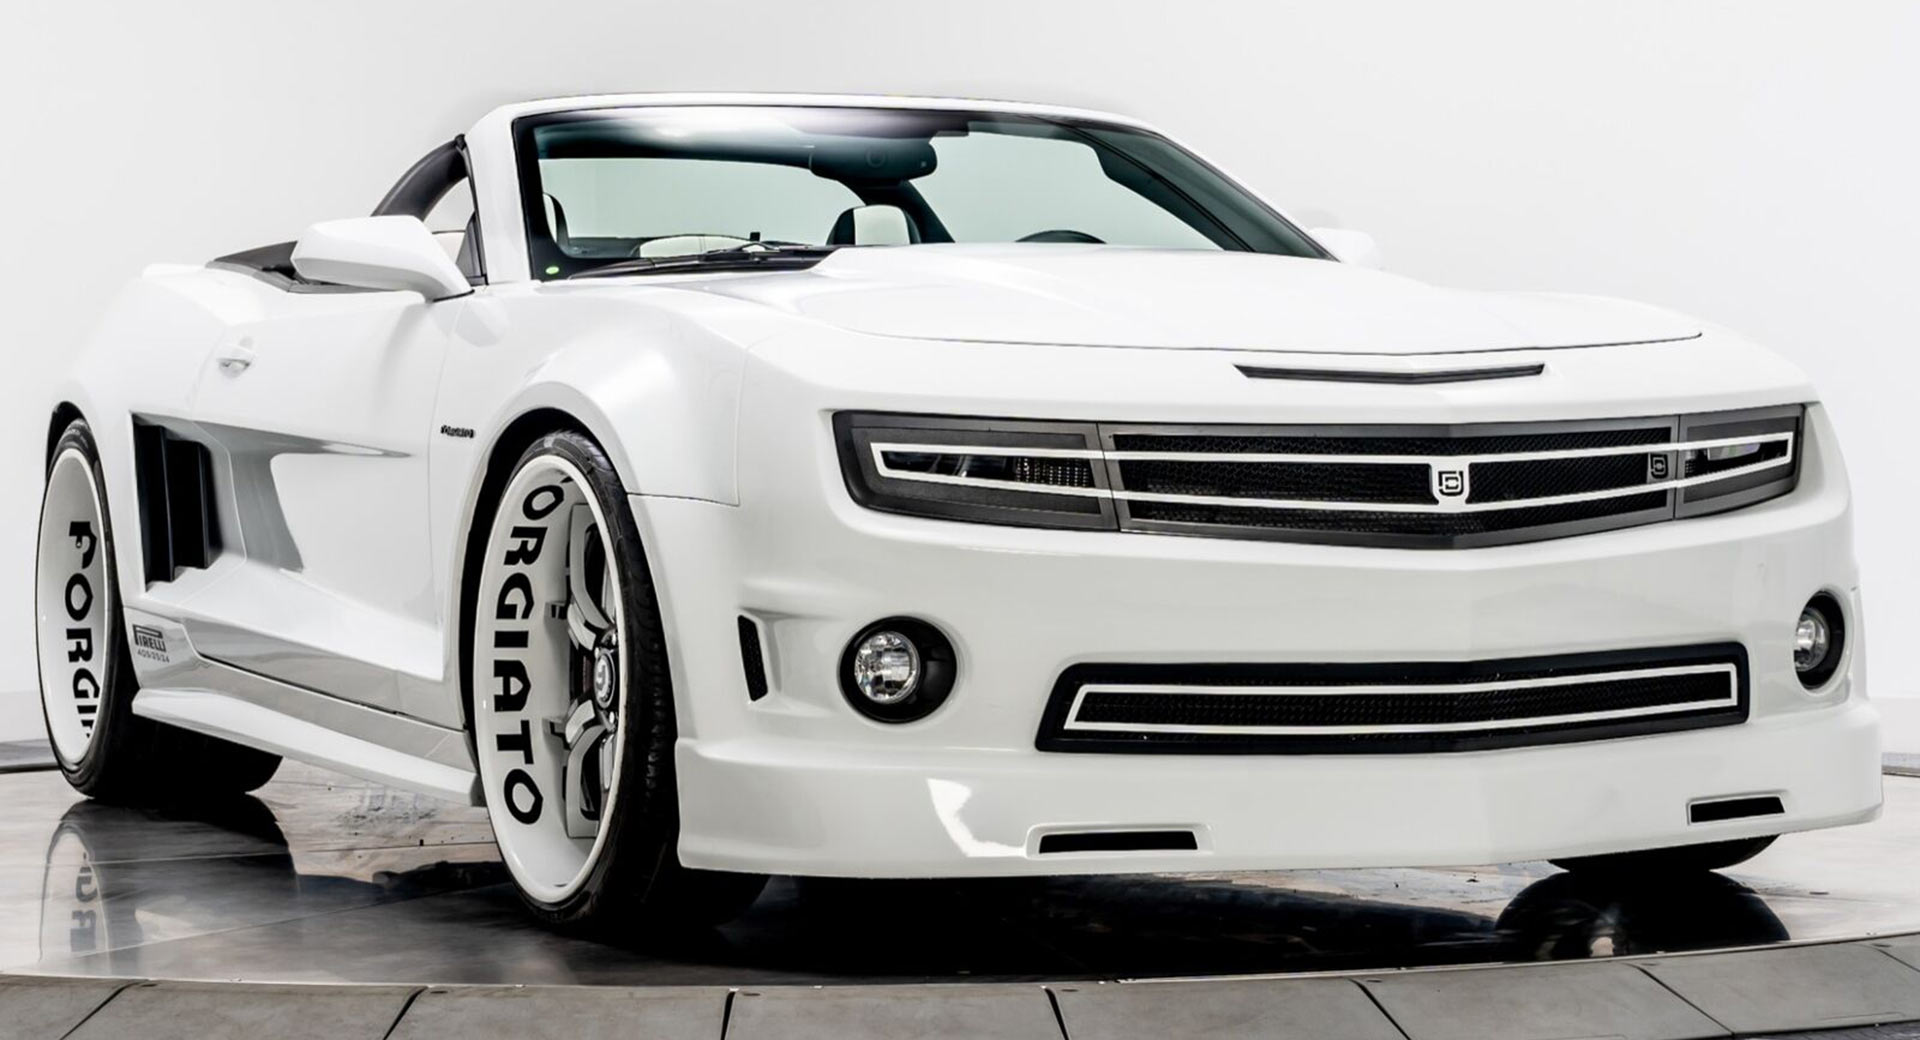 At $190k, This Widebody 2011 Camaro SS With 405/25 Rear Tires Is Oh, So OTT  | Carscoops